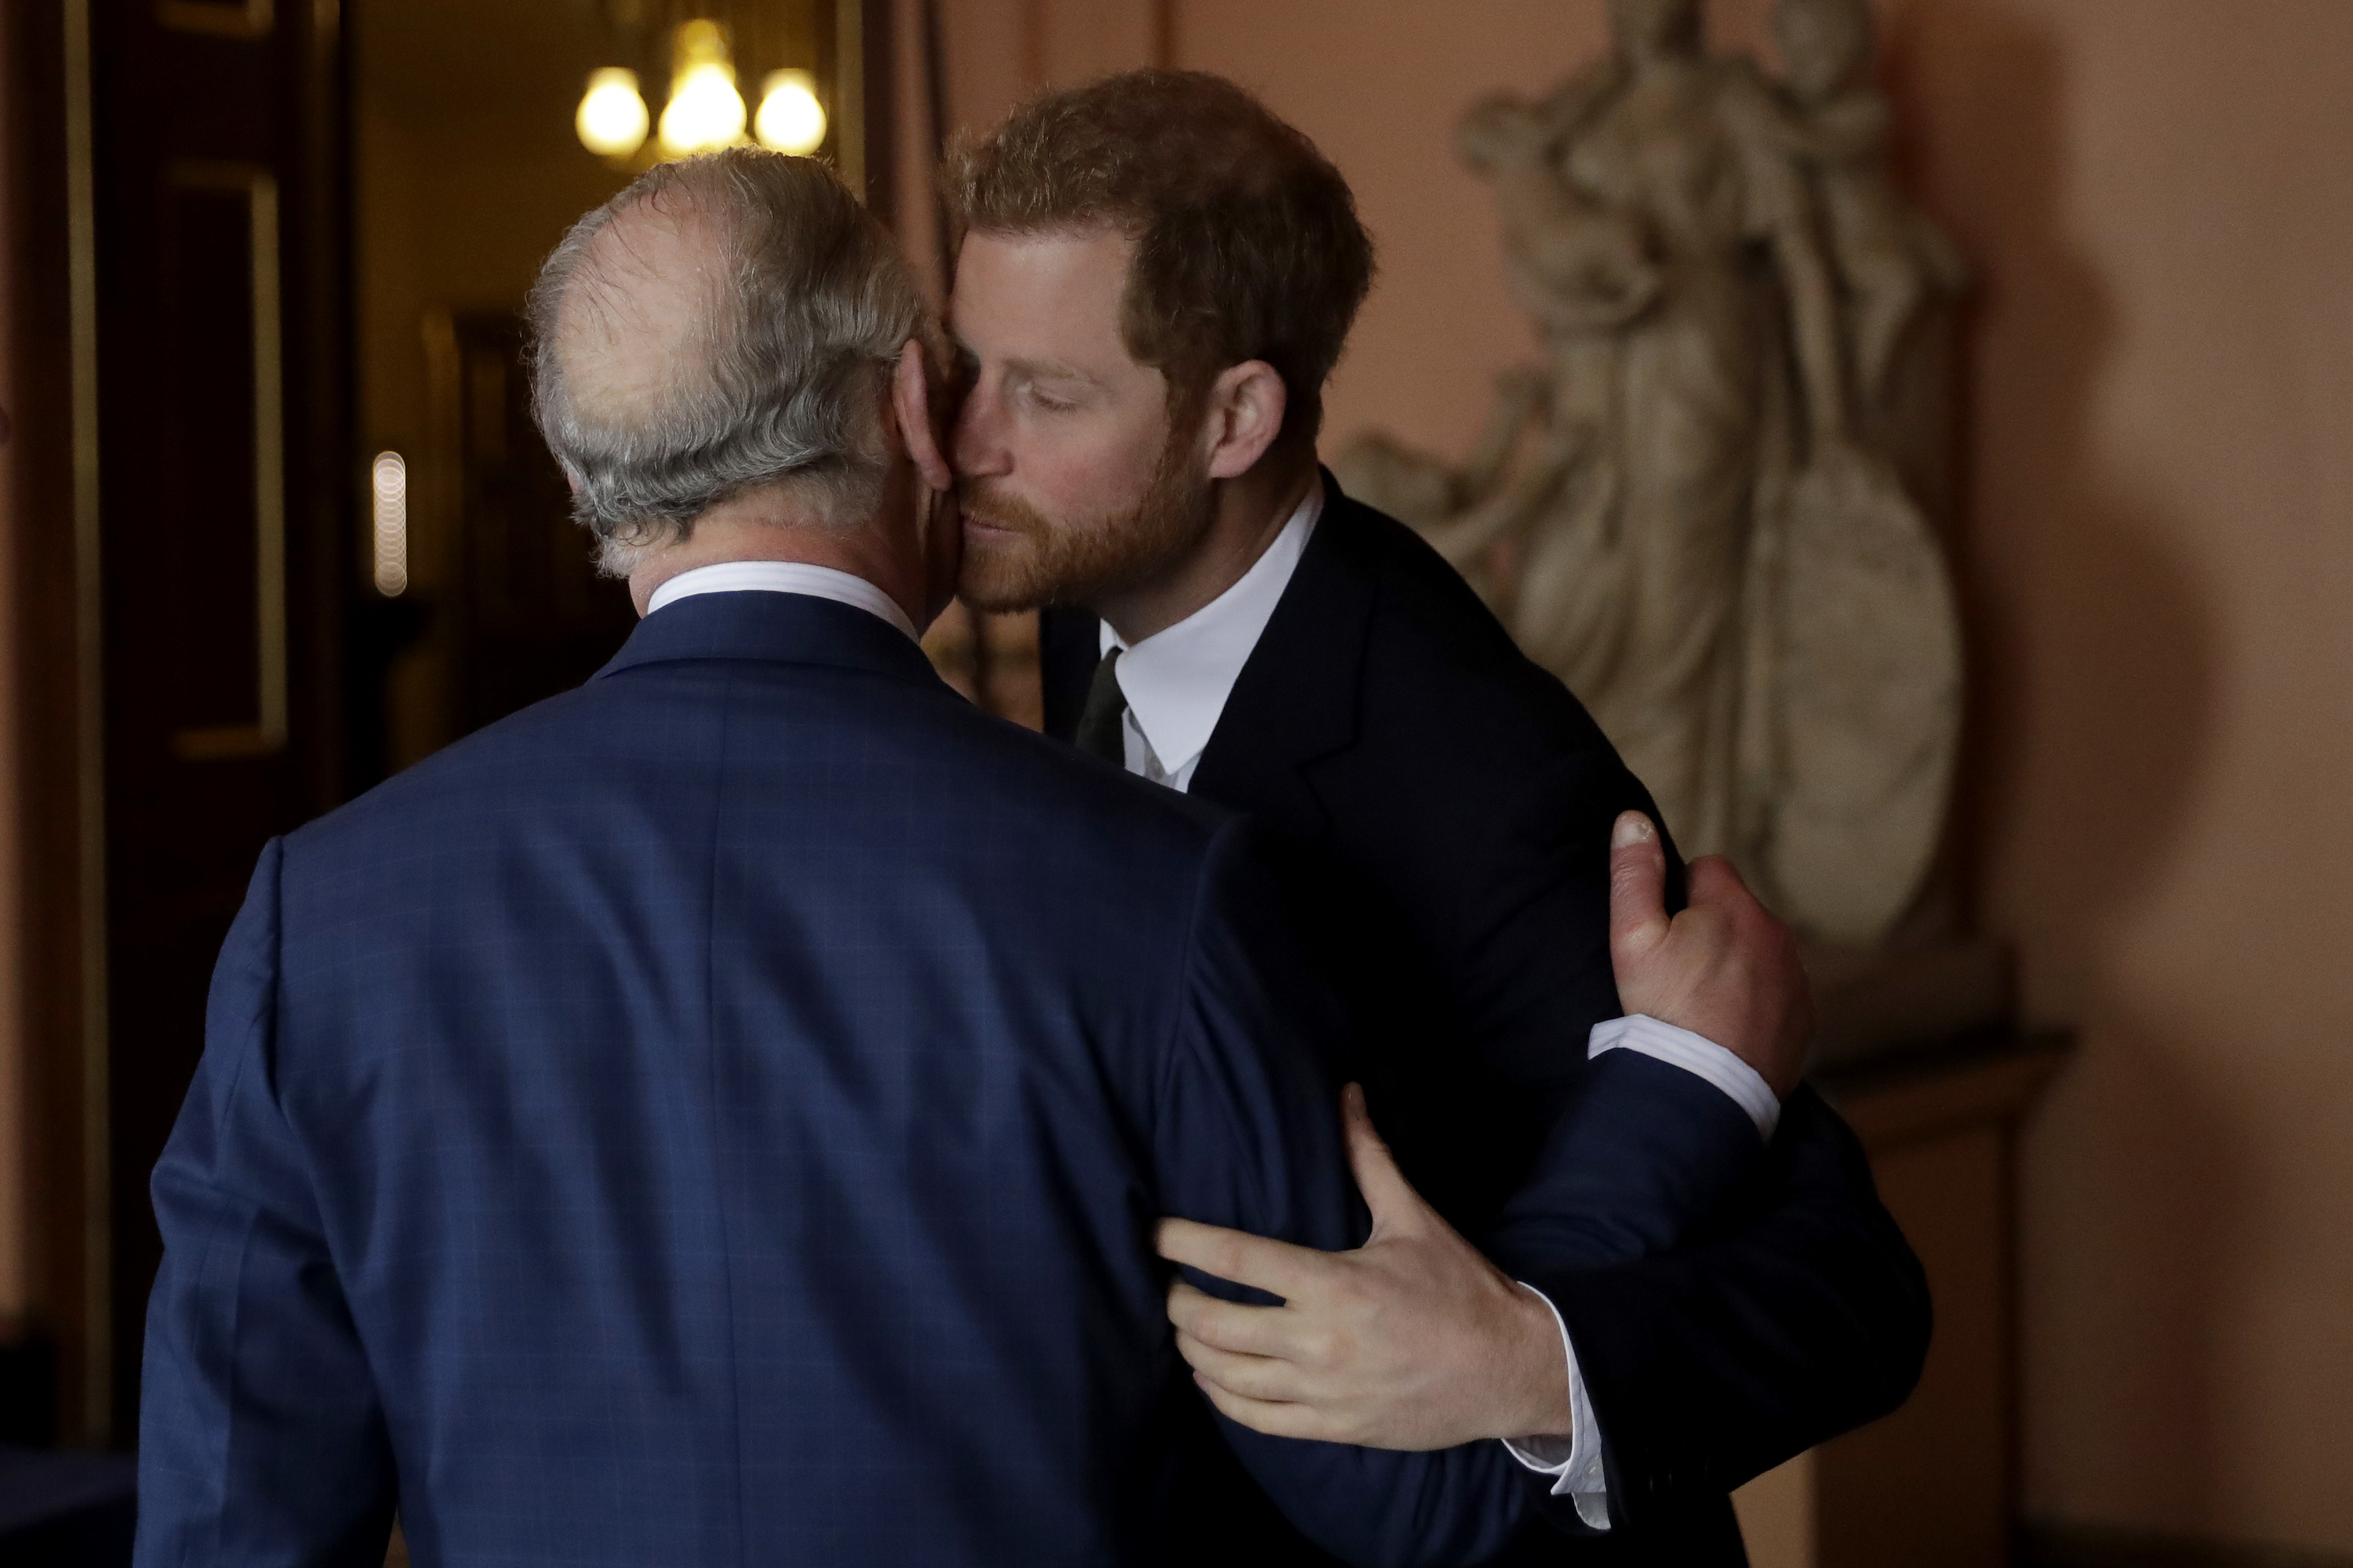 Prince Harry and King Charles III in London in 2018 | Source: Getty Images